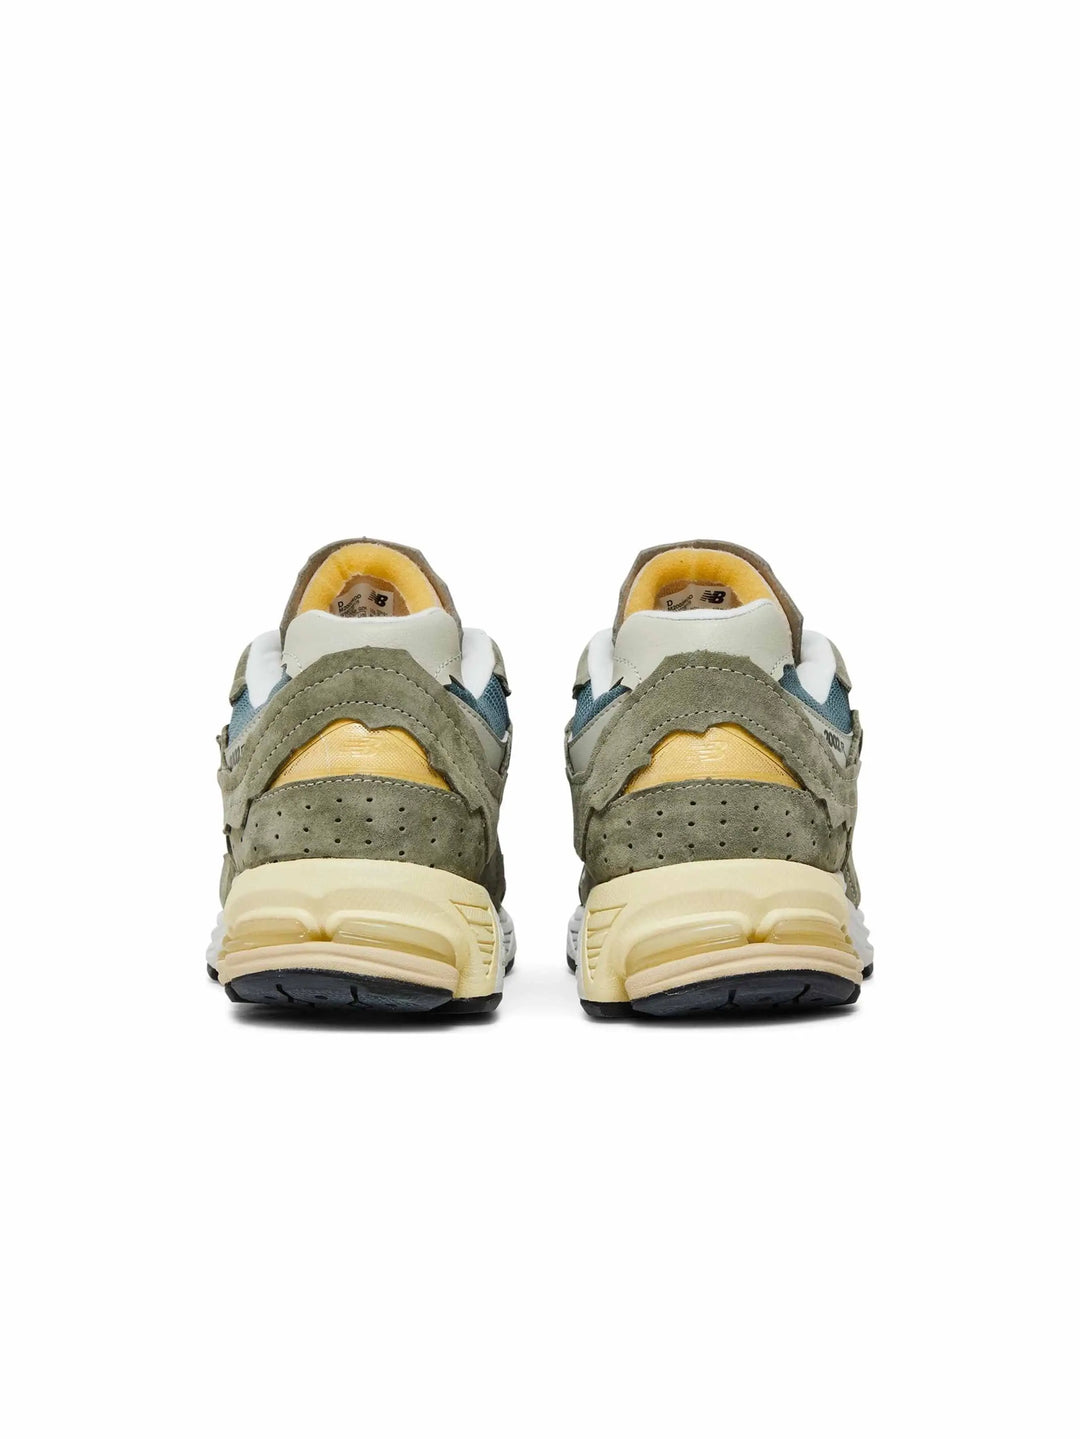 New Balance 2002R Protection Pack Mirage Grey in Auckland, New Zealand - Shop name